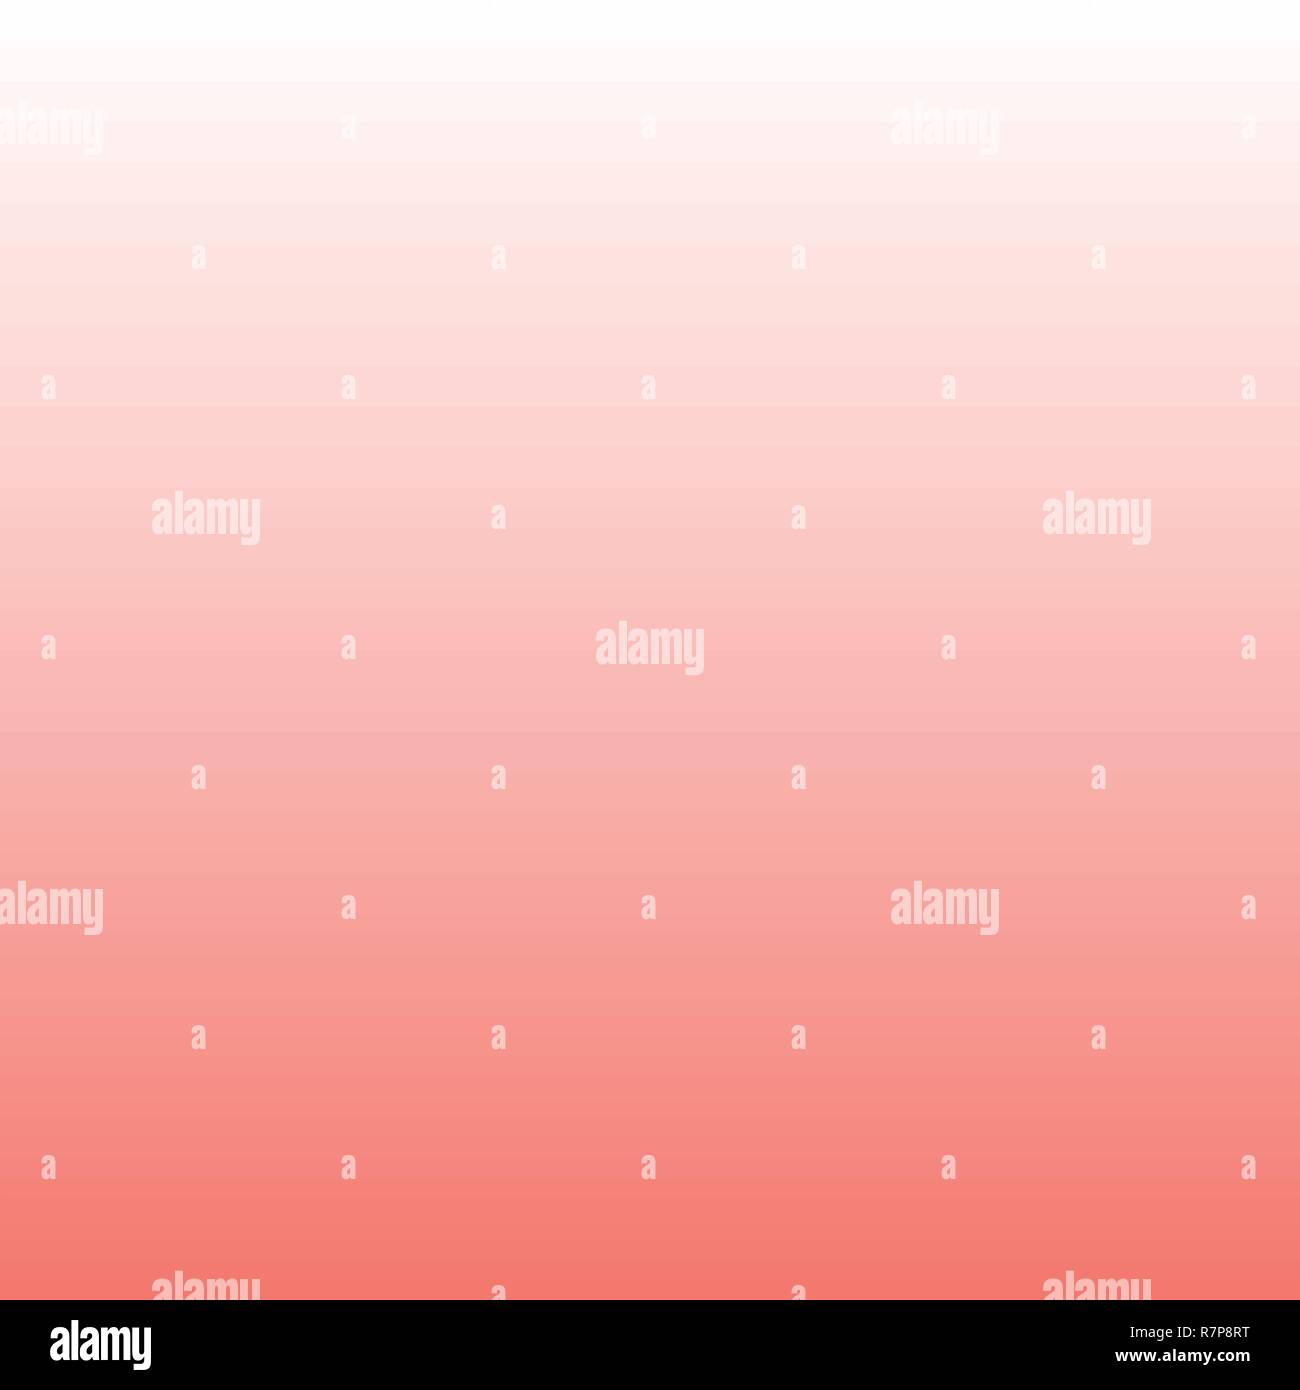 Simple vector image with Living Coral color gradient. Stock Vector